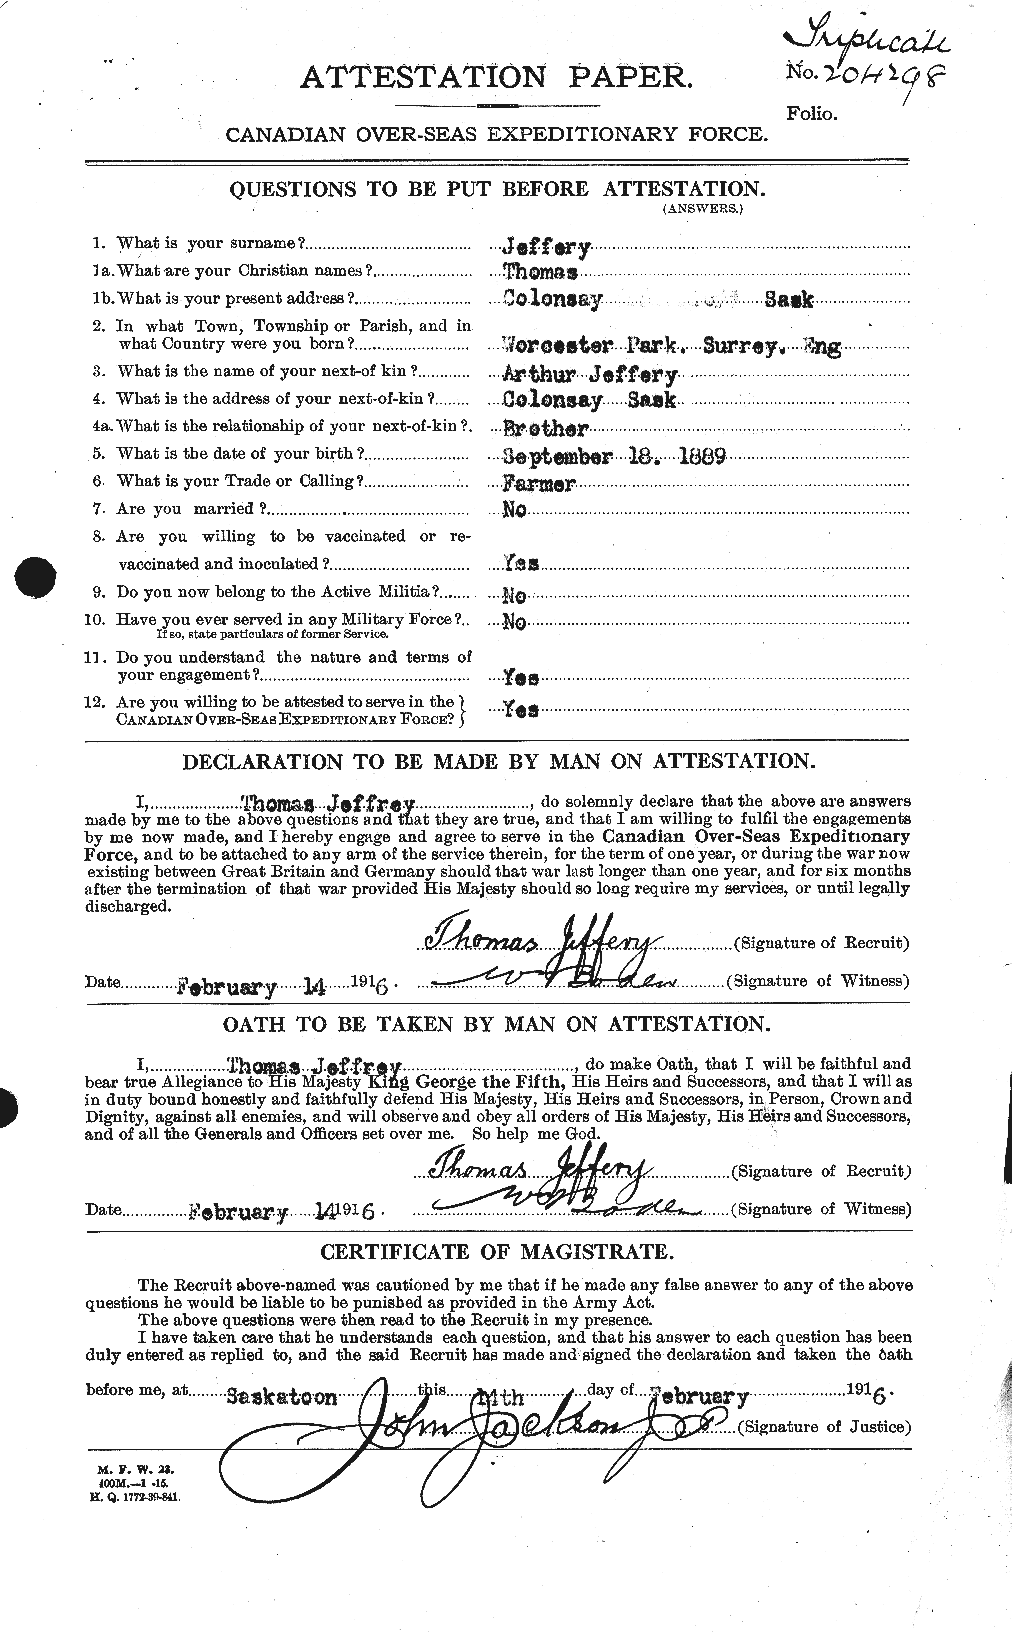 Personnel Records of the First World War - CEF 417802a